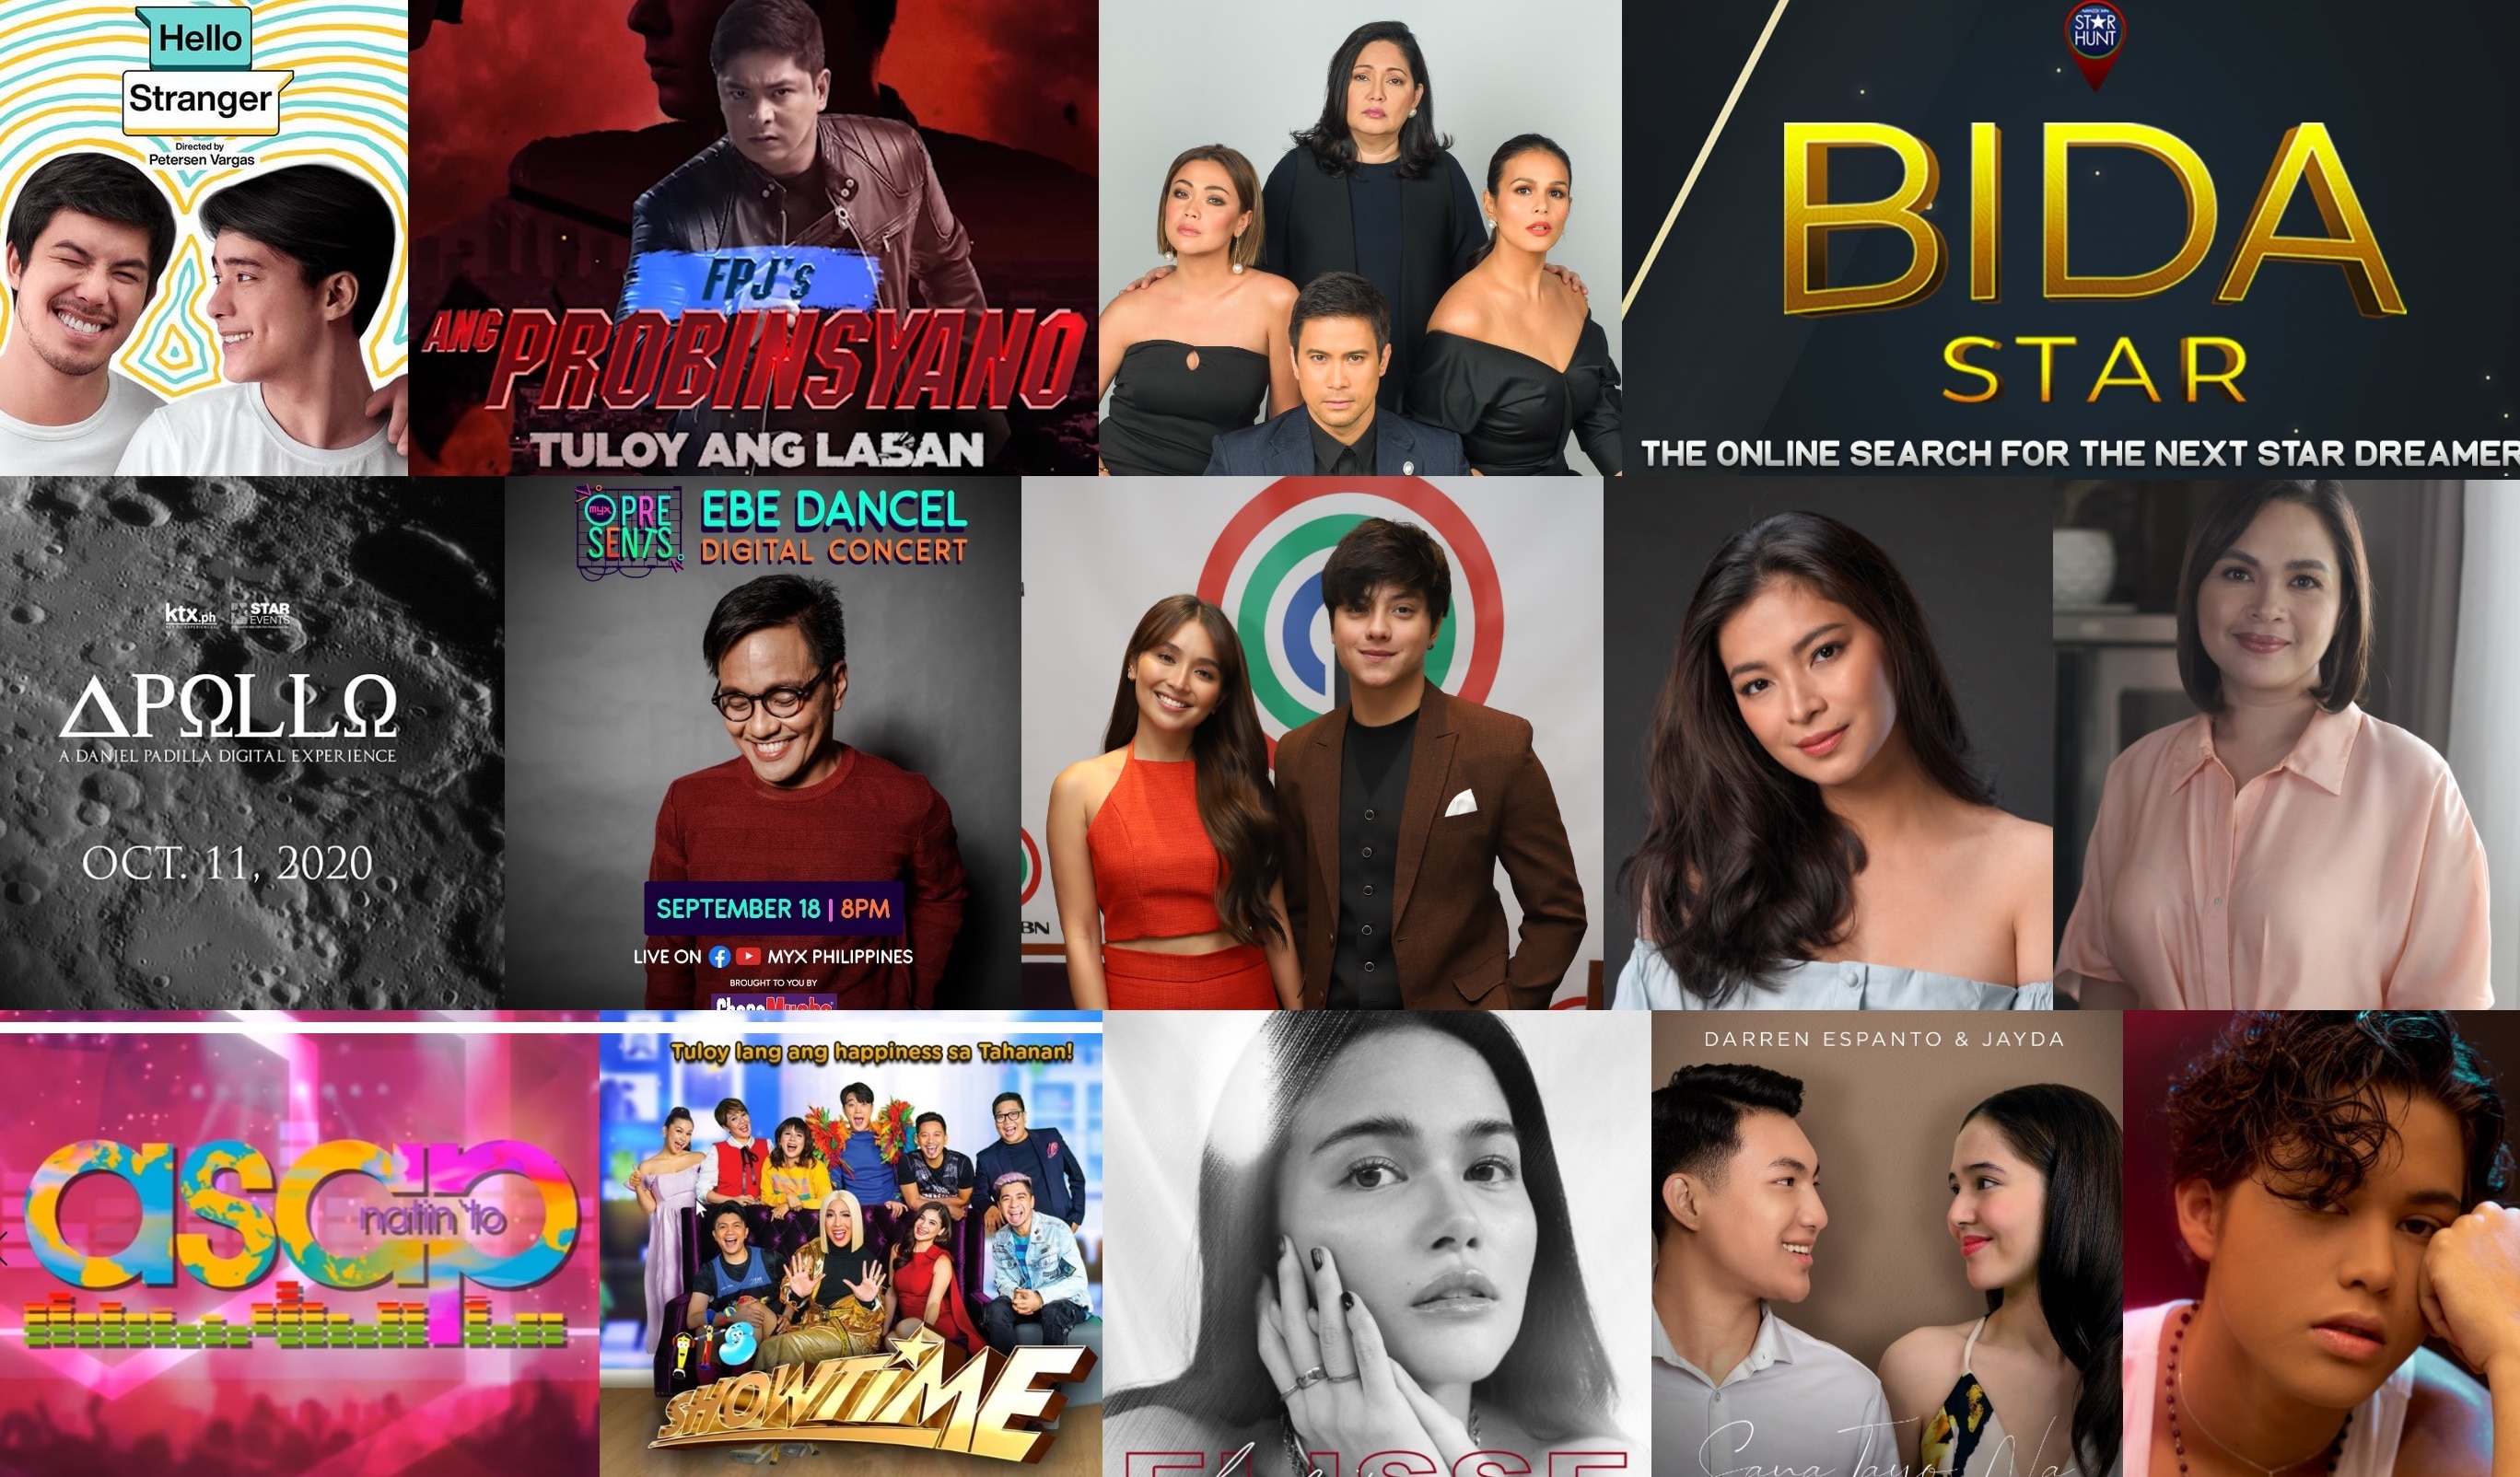 ABS-CBN launches more new shows, digital concerts, and fresh episodes of teleseryes